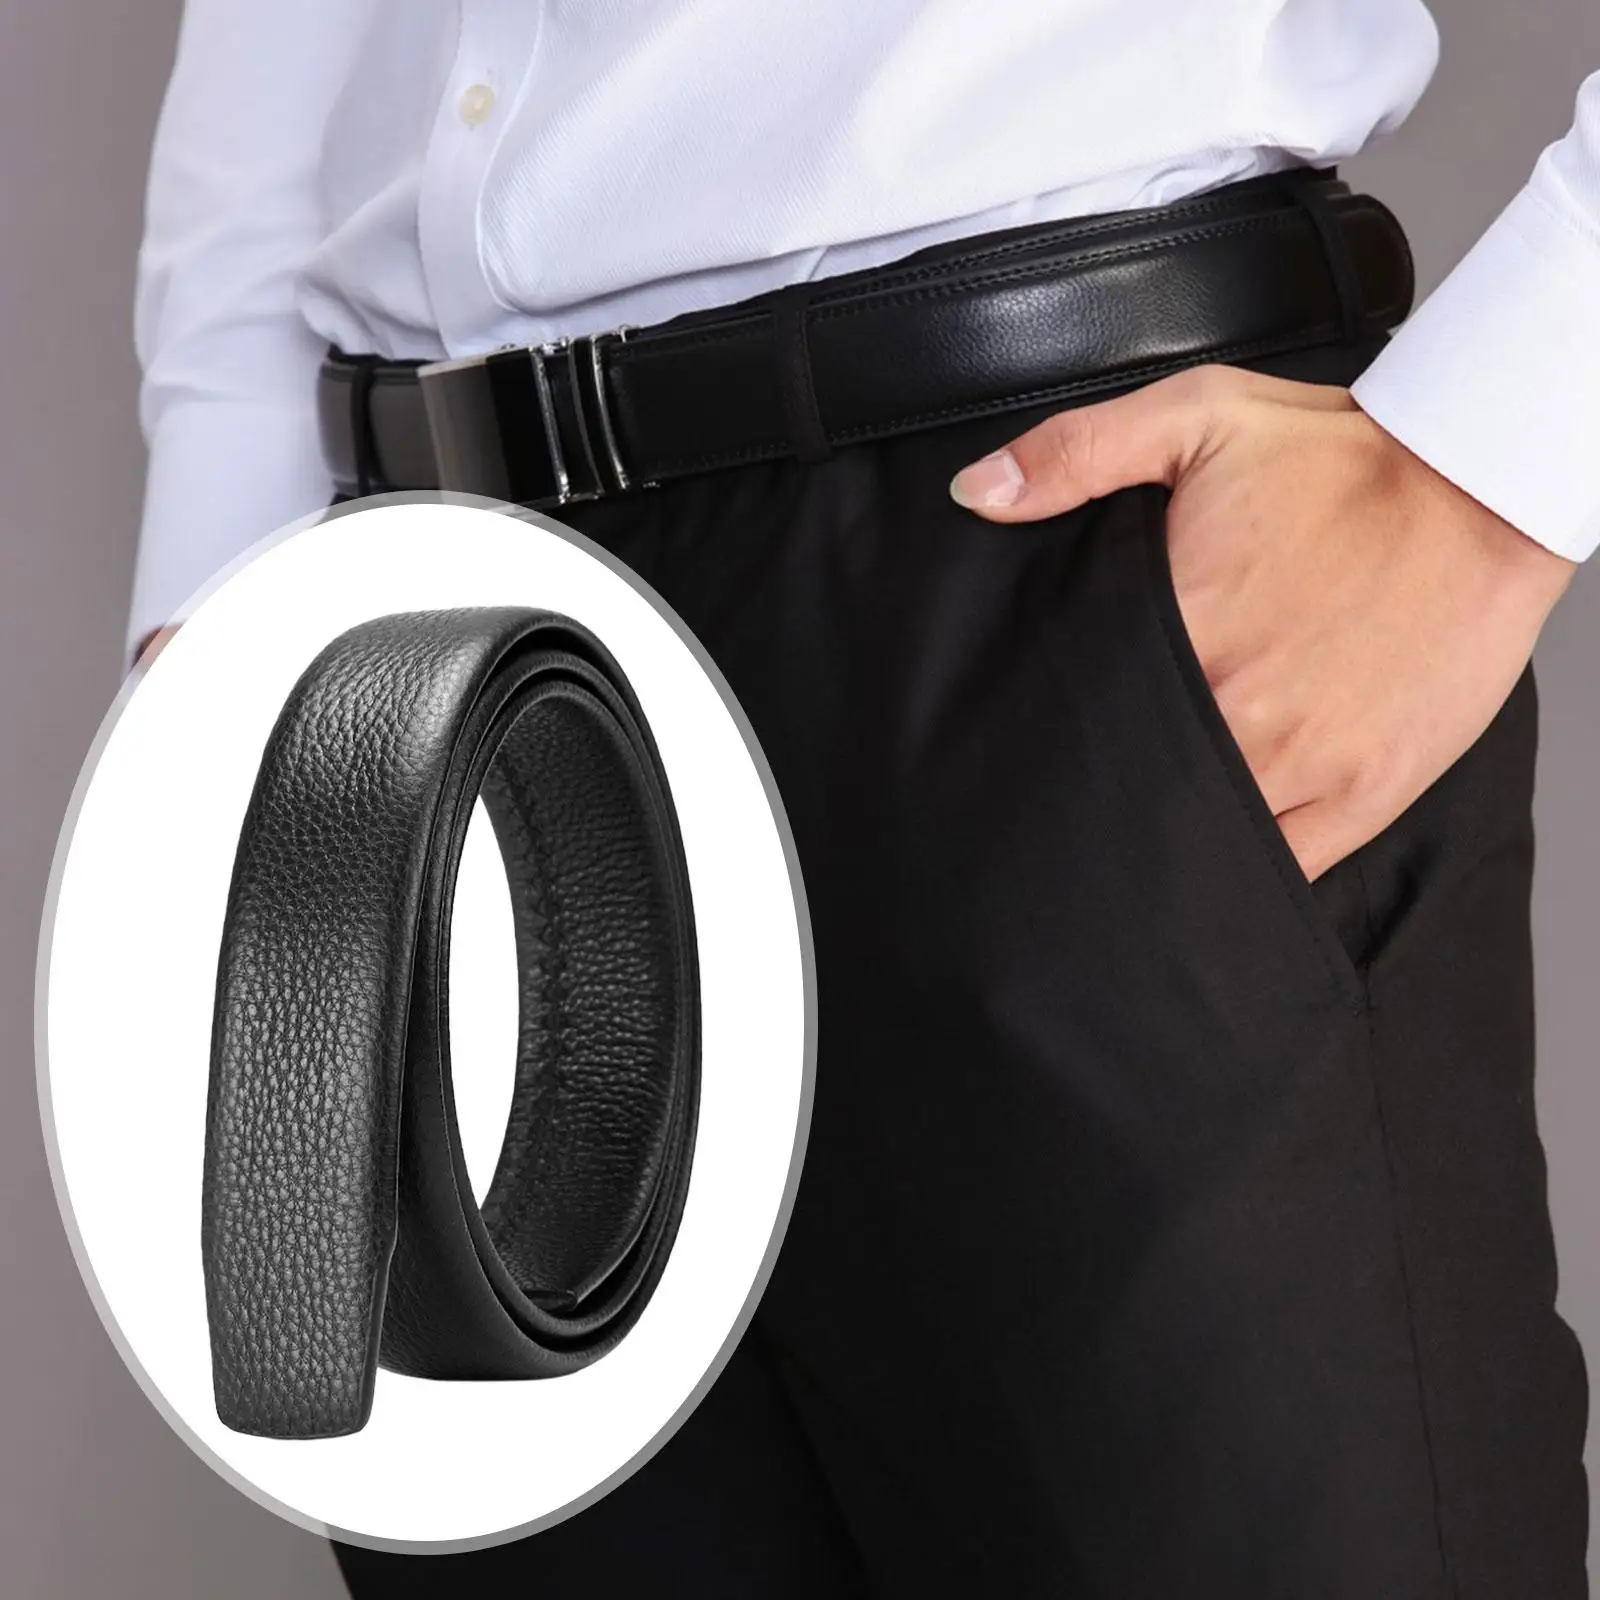 Replacement Belt Strap Stylish Waist Belt for Everyday Wear Shopping Travel